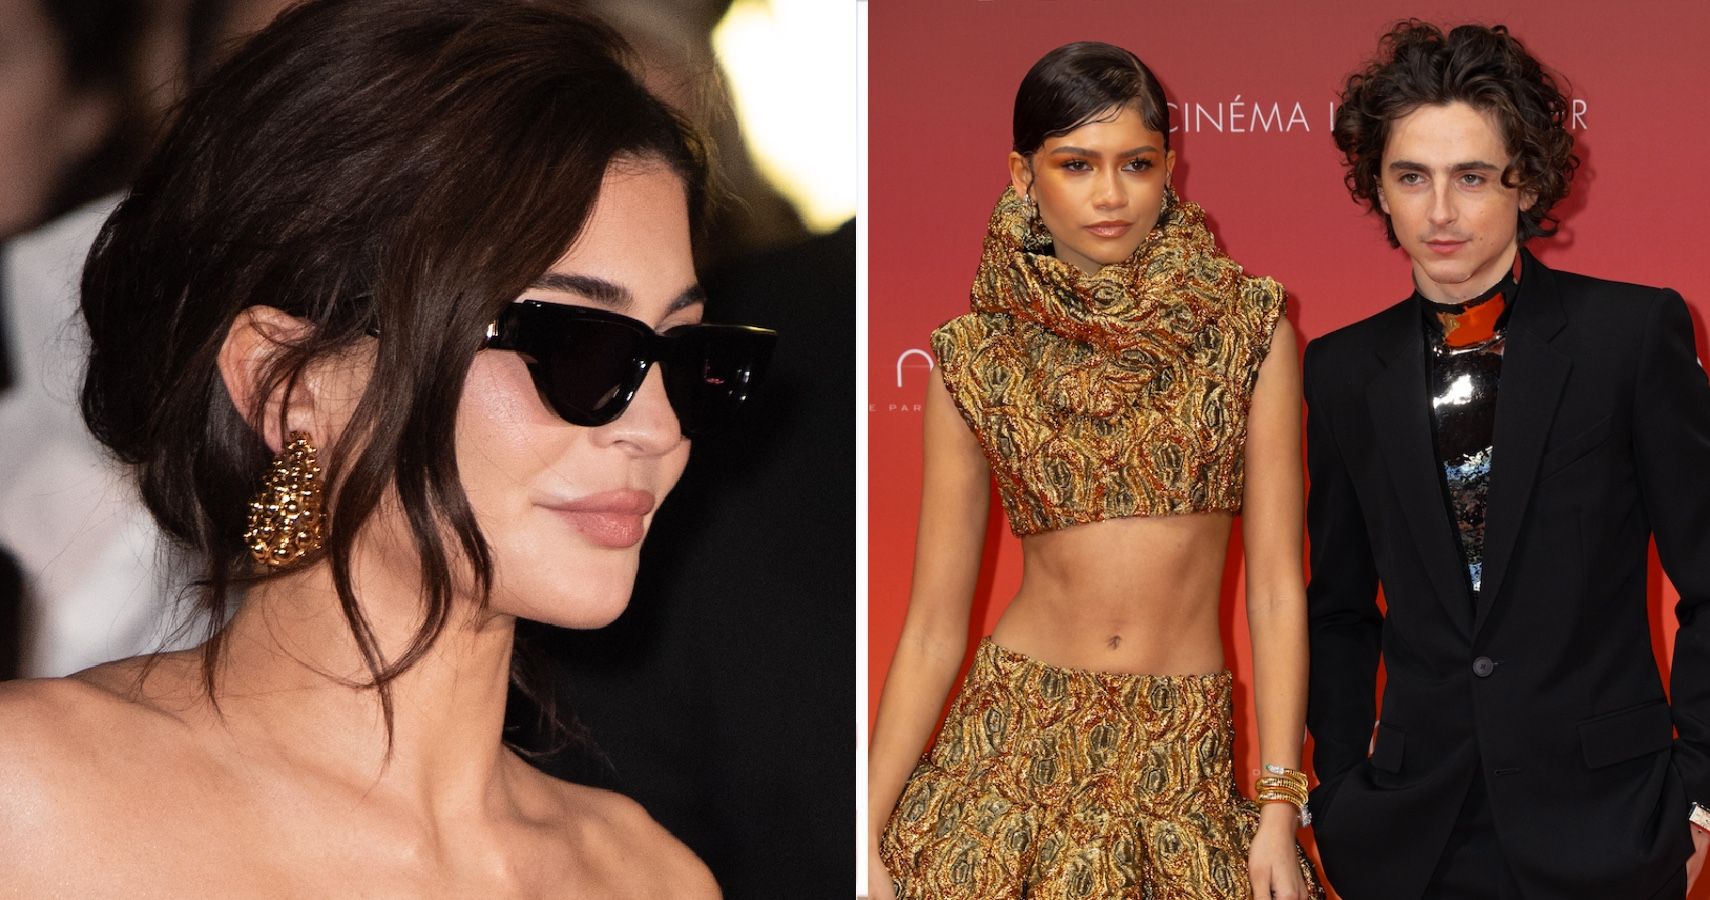 Kylie Jenner Seems Bothered After Zendaya And Timothee Chalamet Wear Matching Outfits To “Dune 2” Premiere